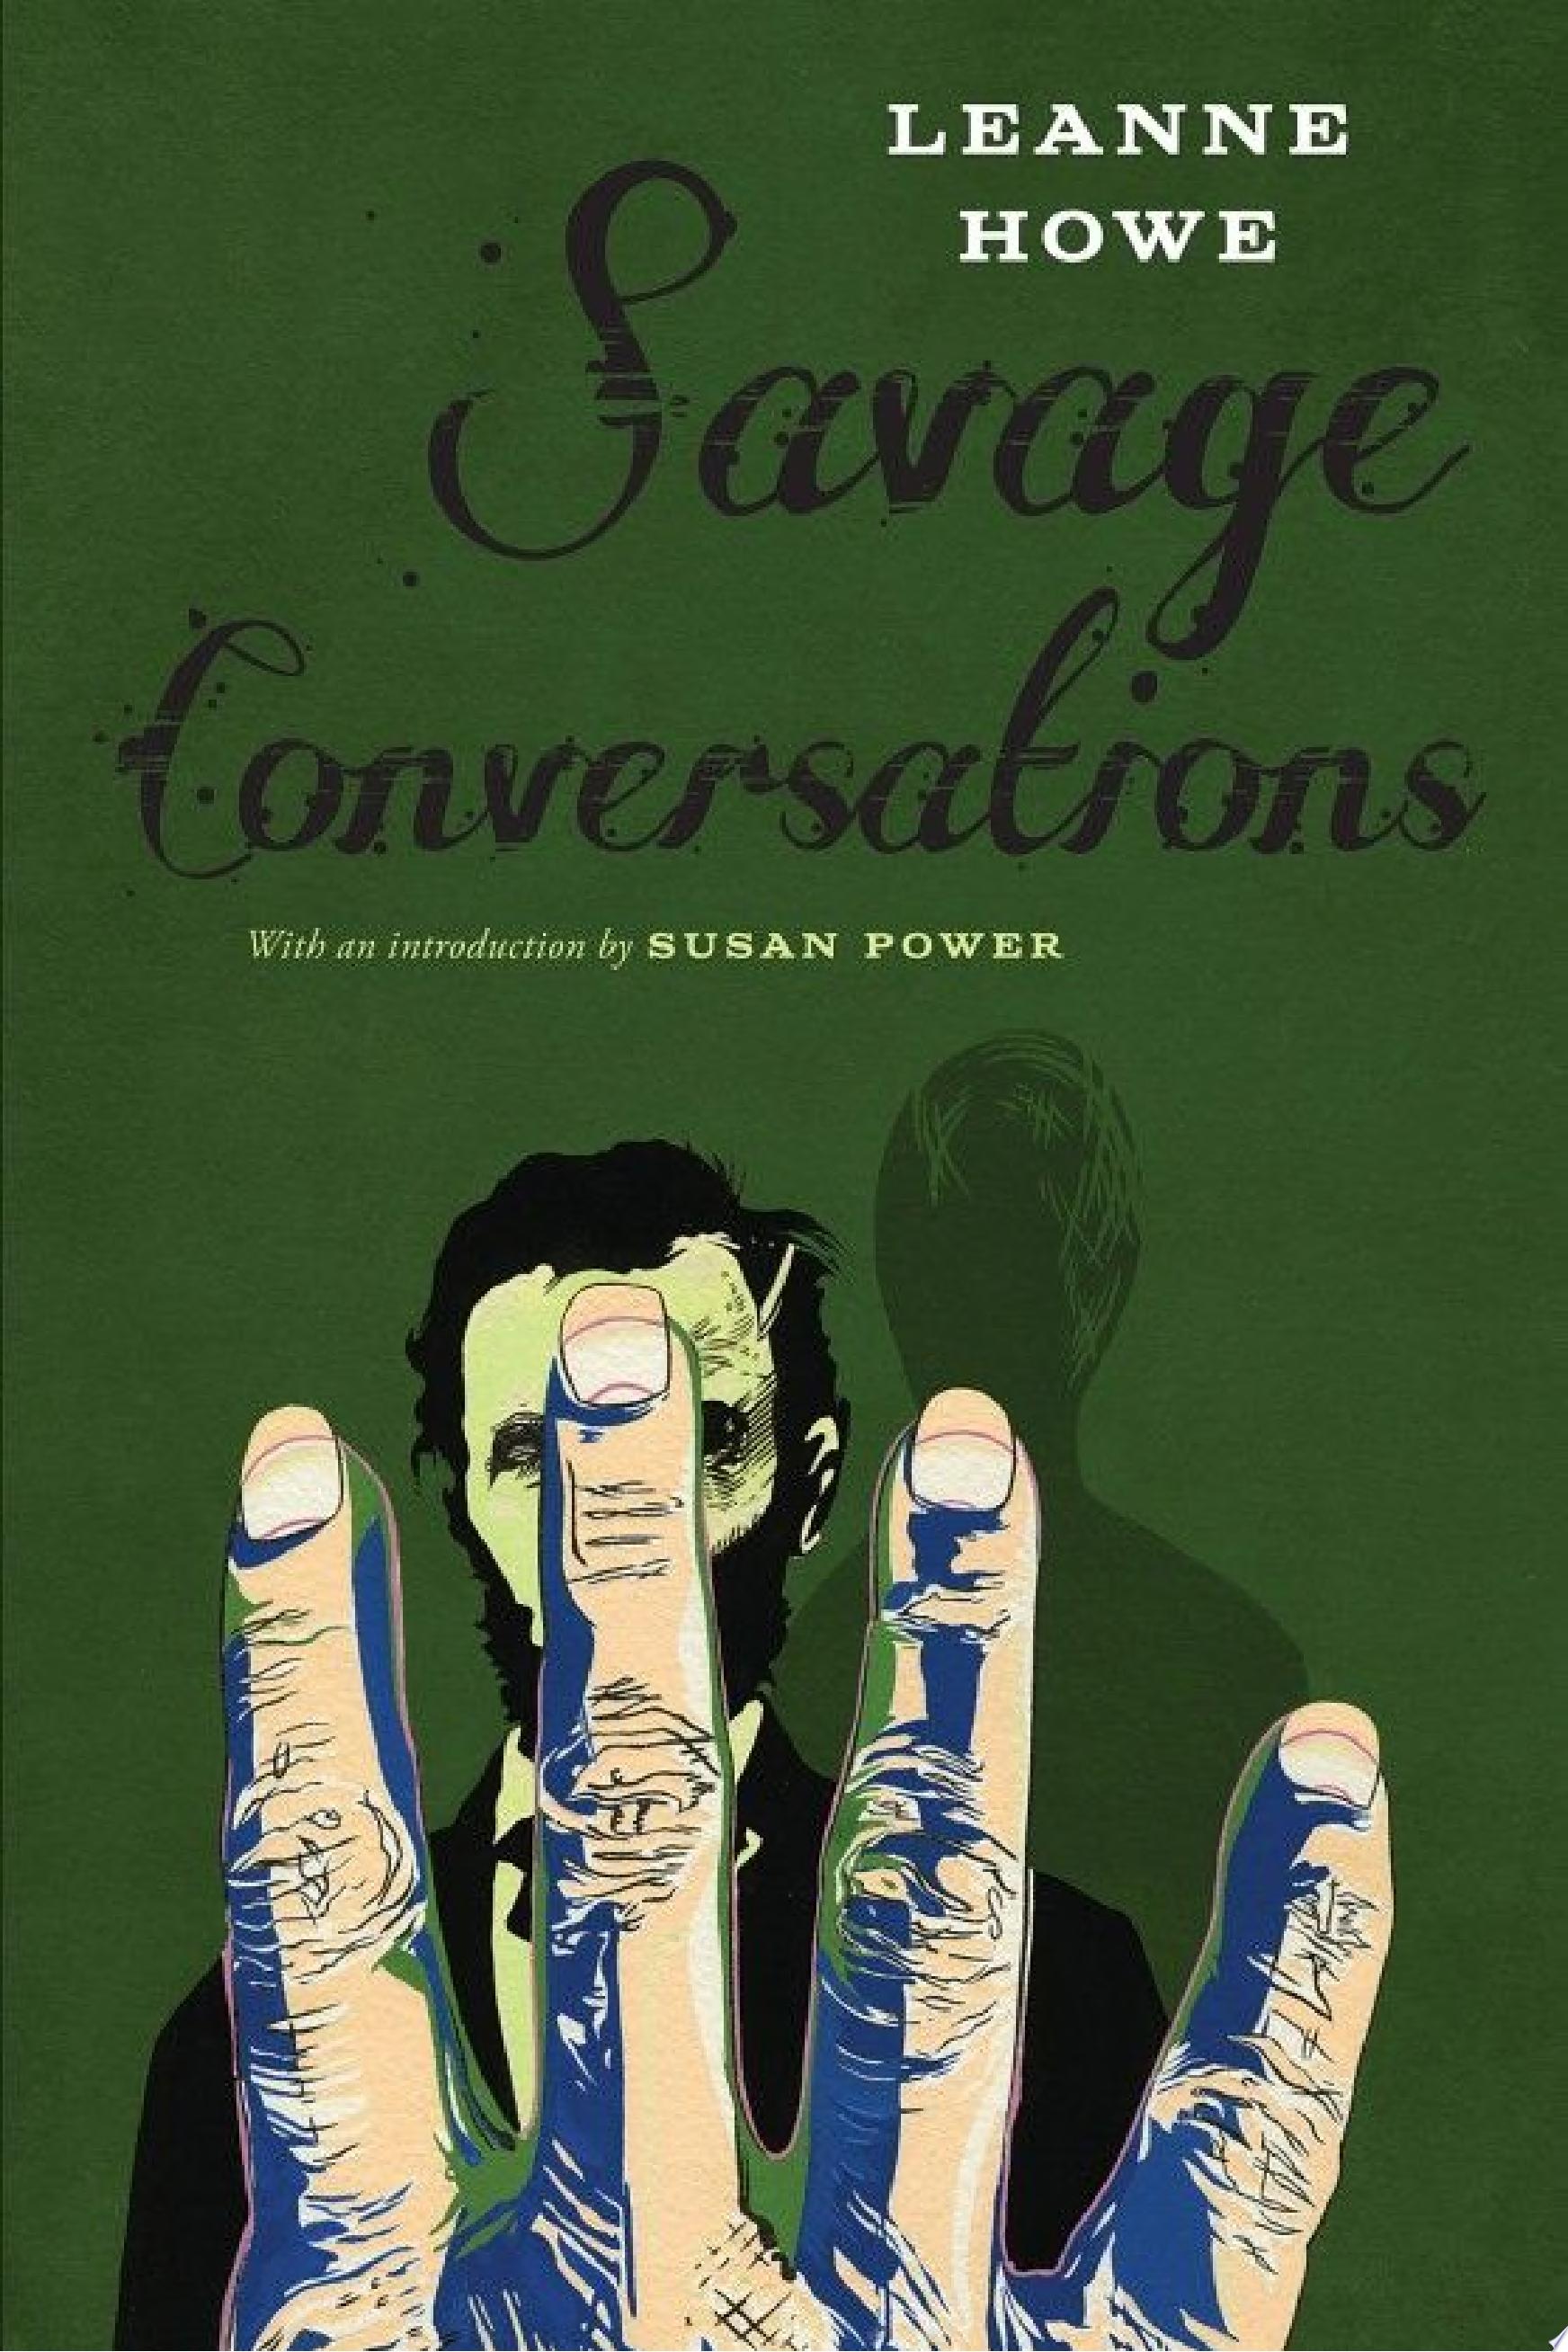 Image for "Savage Conversations"